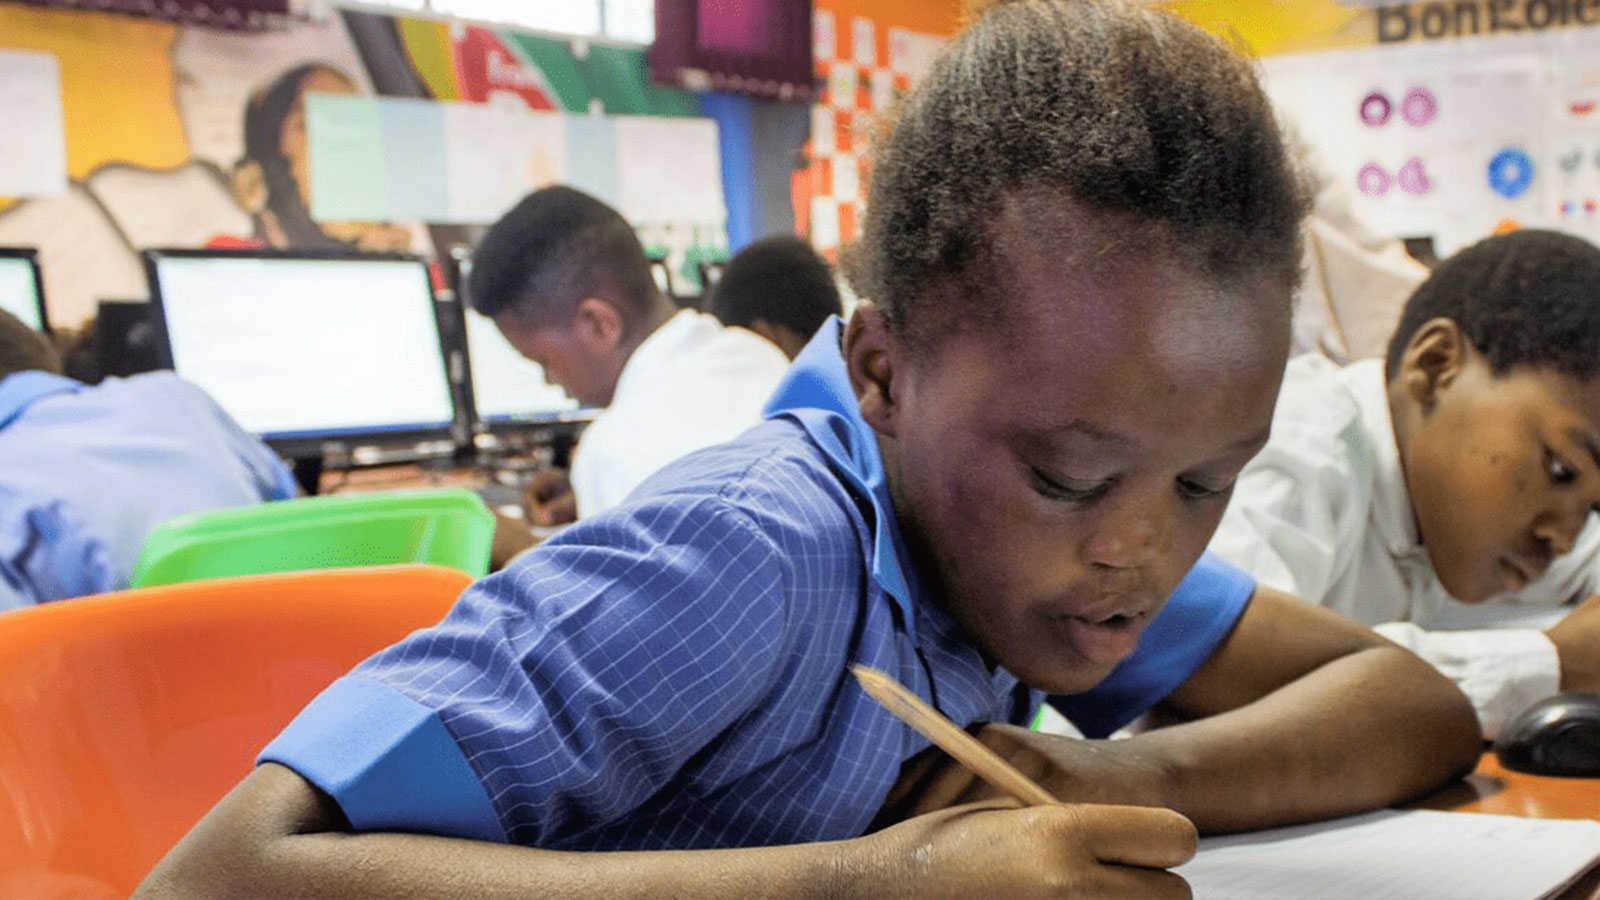 A South African student working on an assignment in a classroom